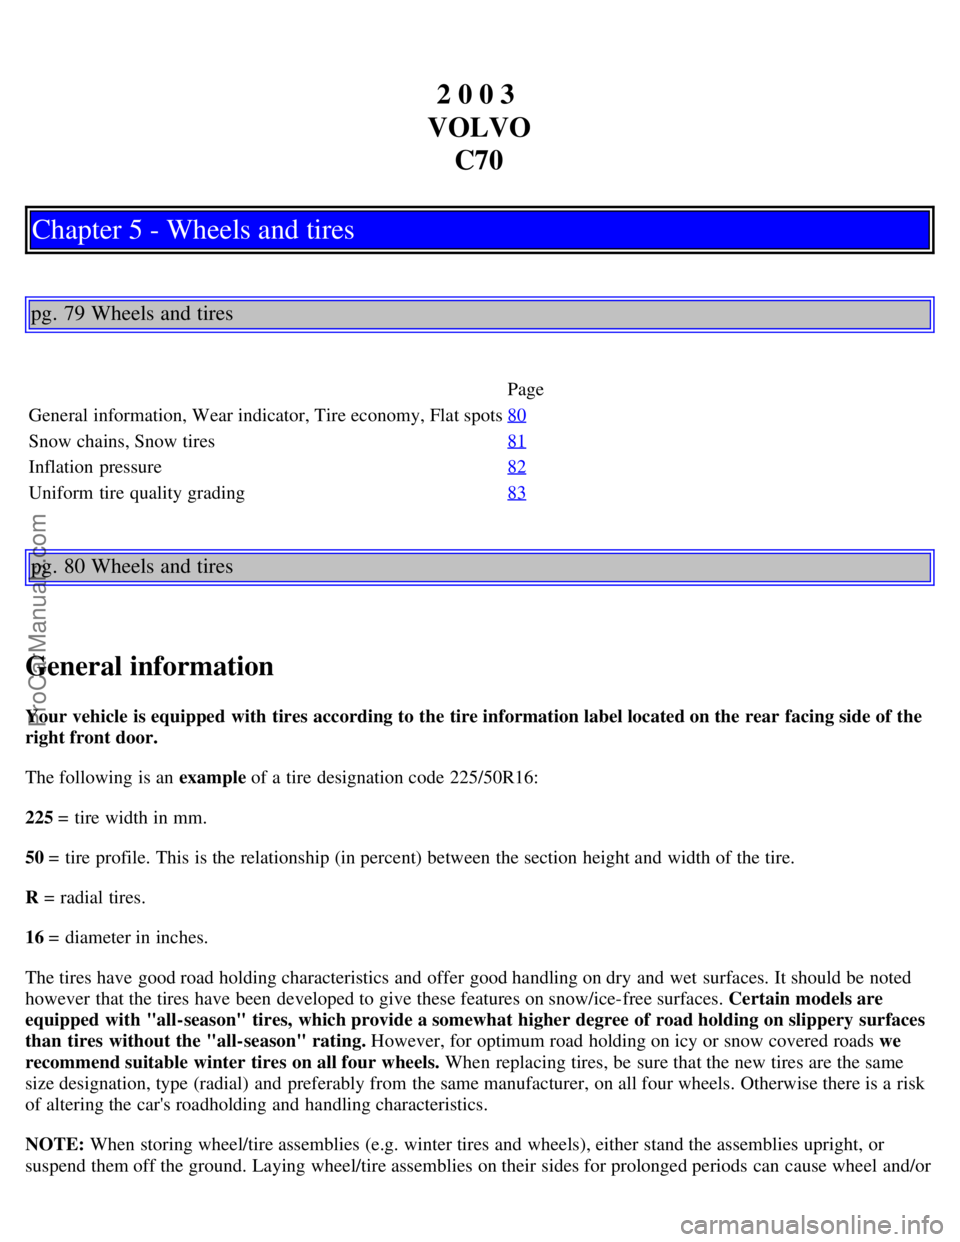 VOLVO C70 2003  Owners Manual 2 0 0 3 
VOLVO C70
Chapter 5 - Wheels and tires
pg. 79 Wheels and tires
Page
General information, Wear indicator, Tire economy, Flat spots 80
Snow chains, Snow tires81
Inflation  pressure82
Uniform  t